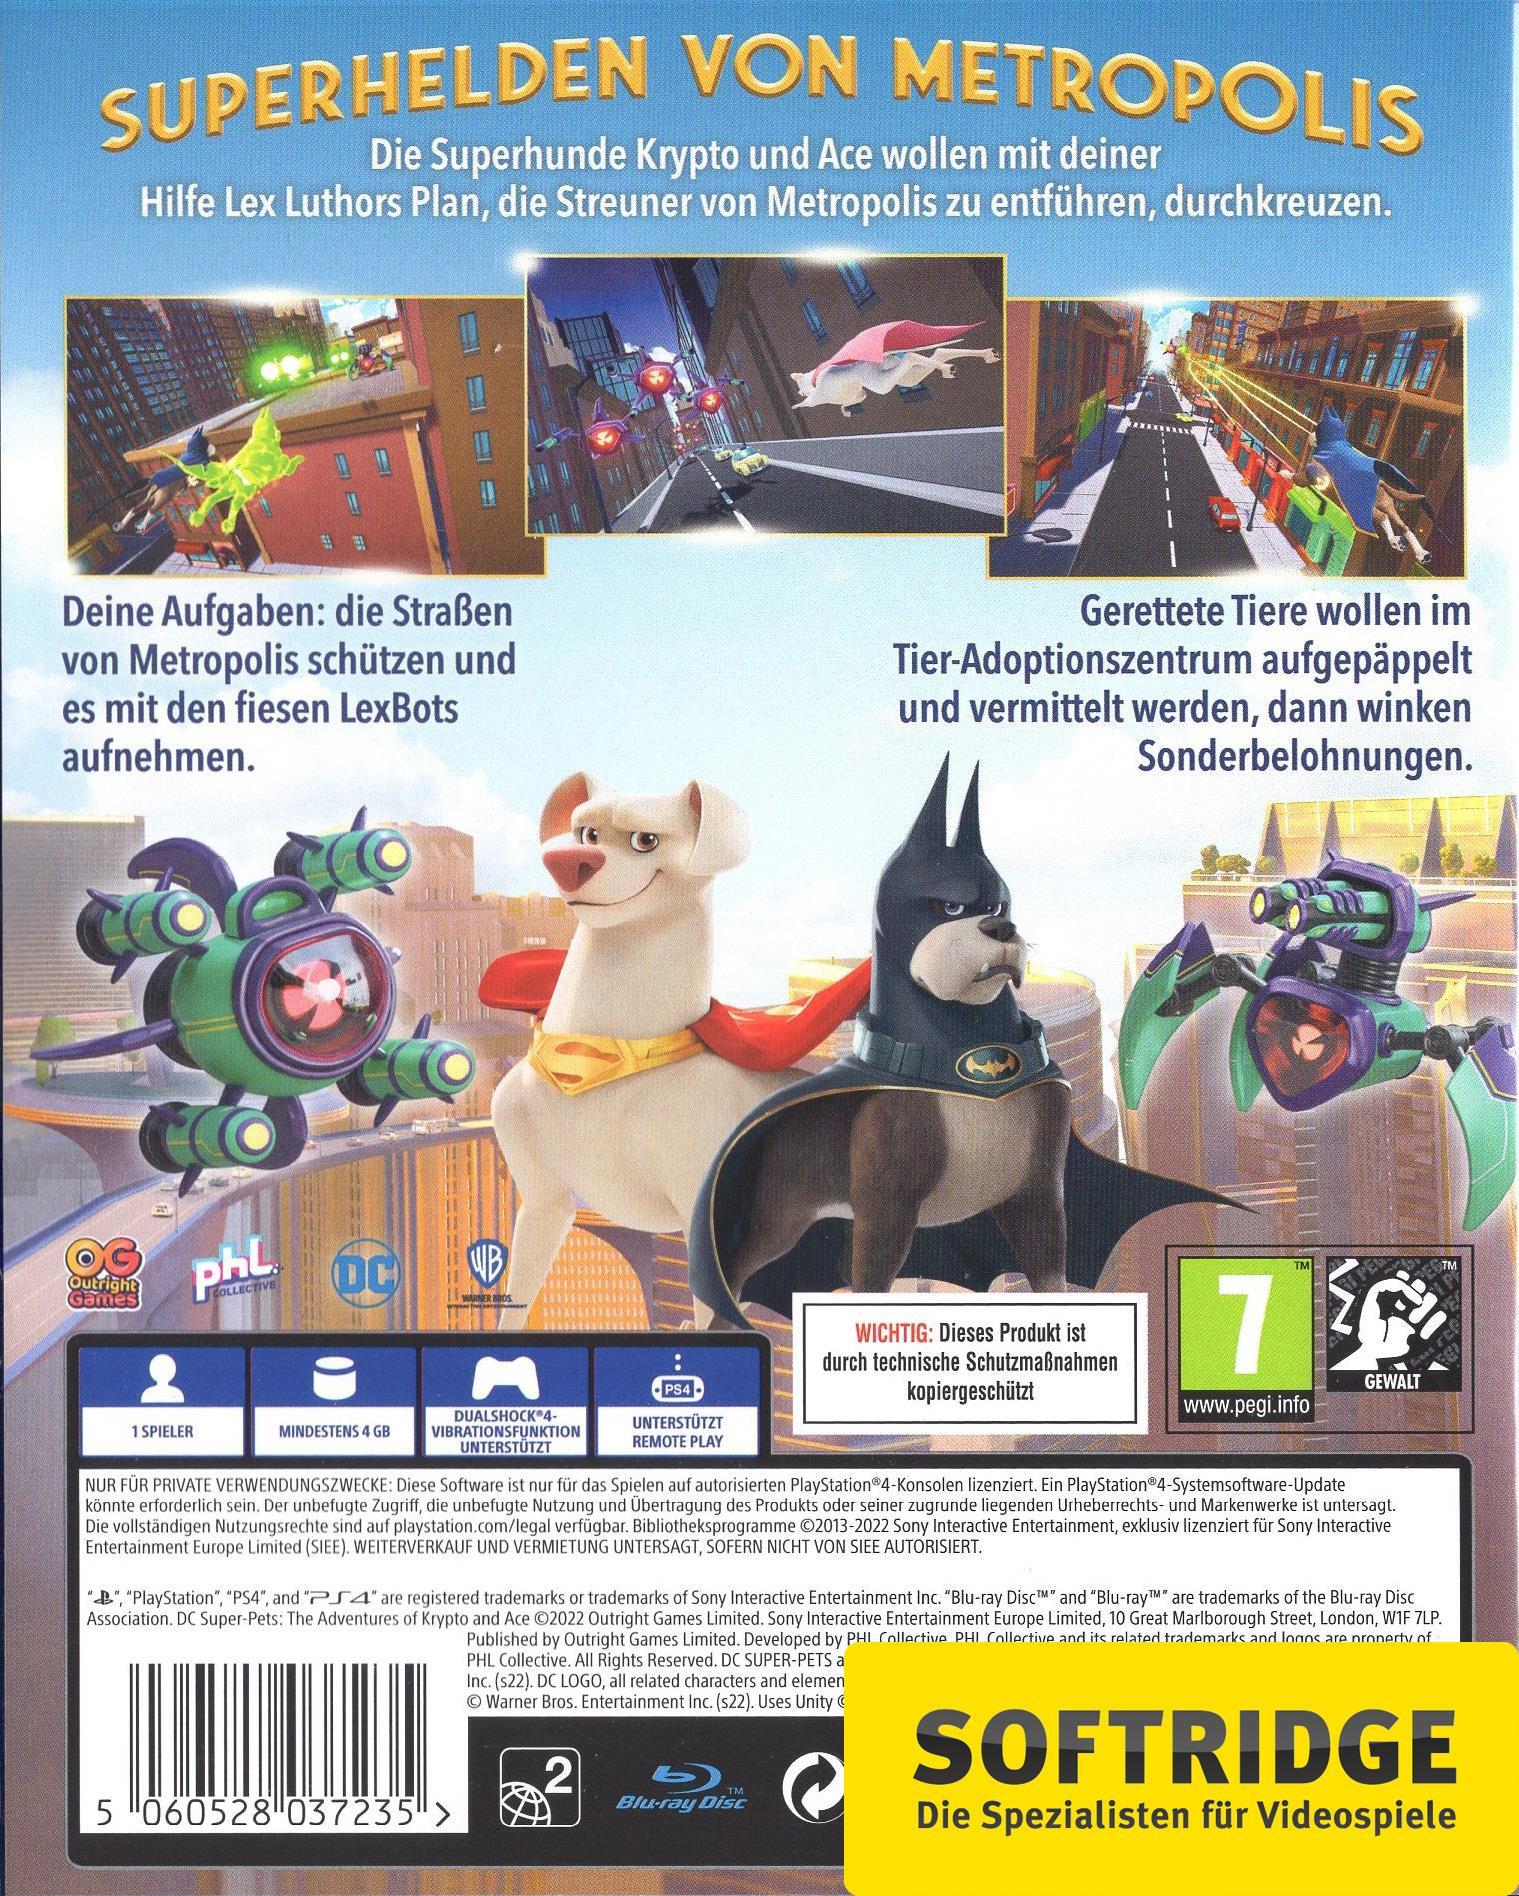 Outright Games  PS4 DC League of Super-Pets 